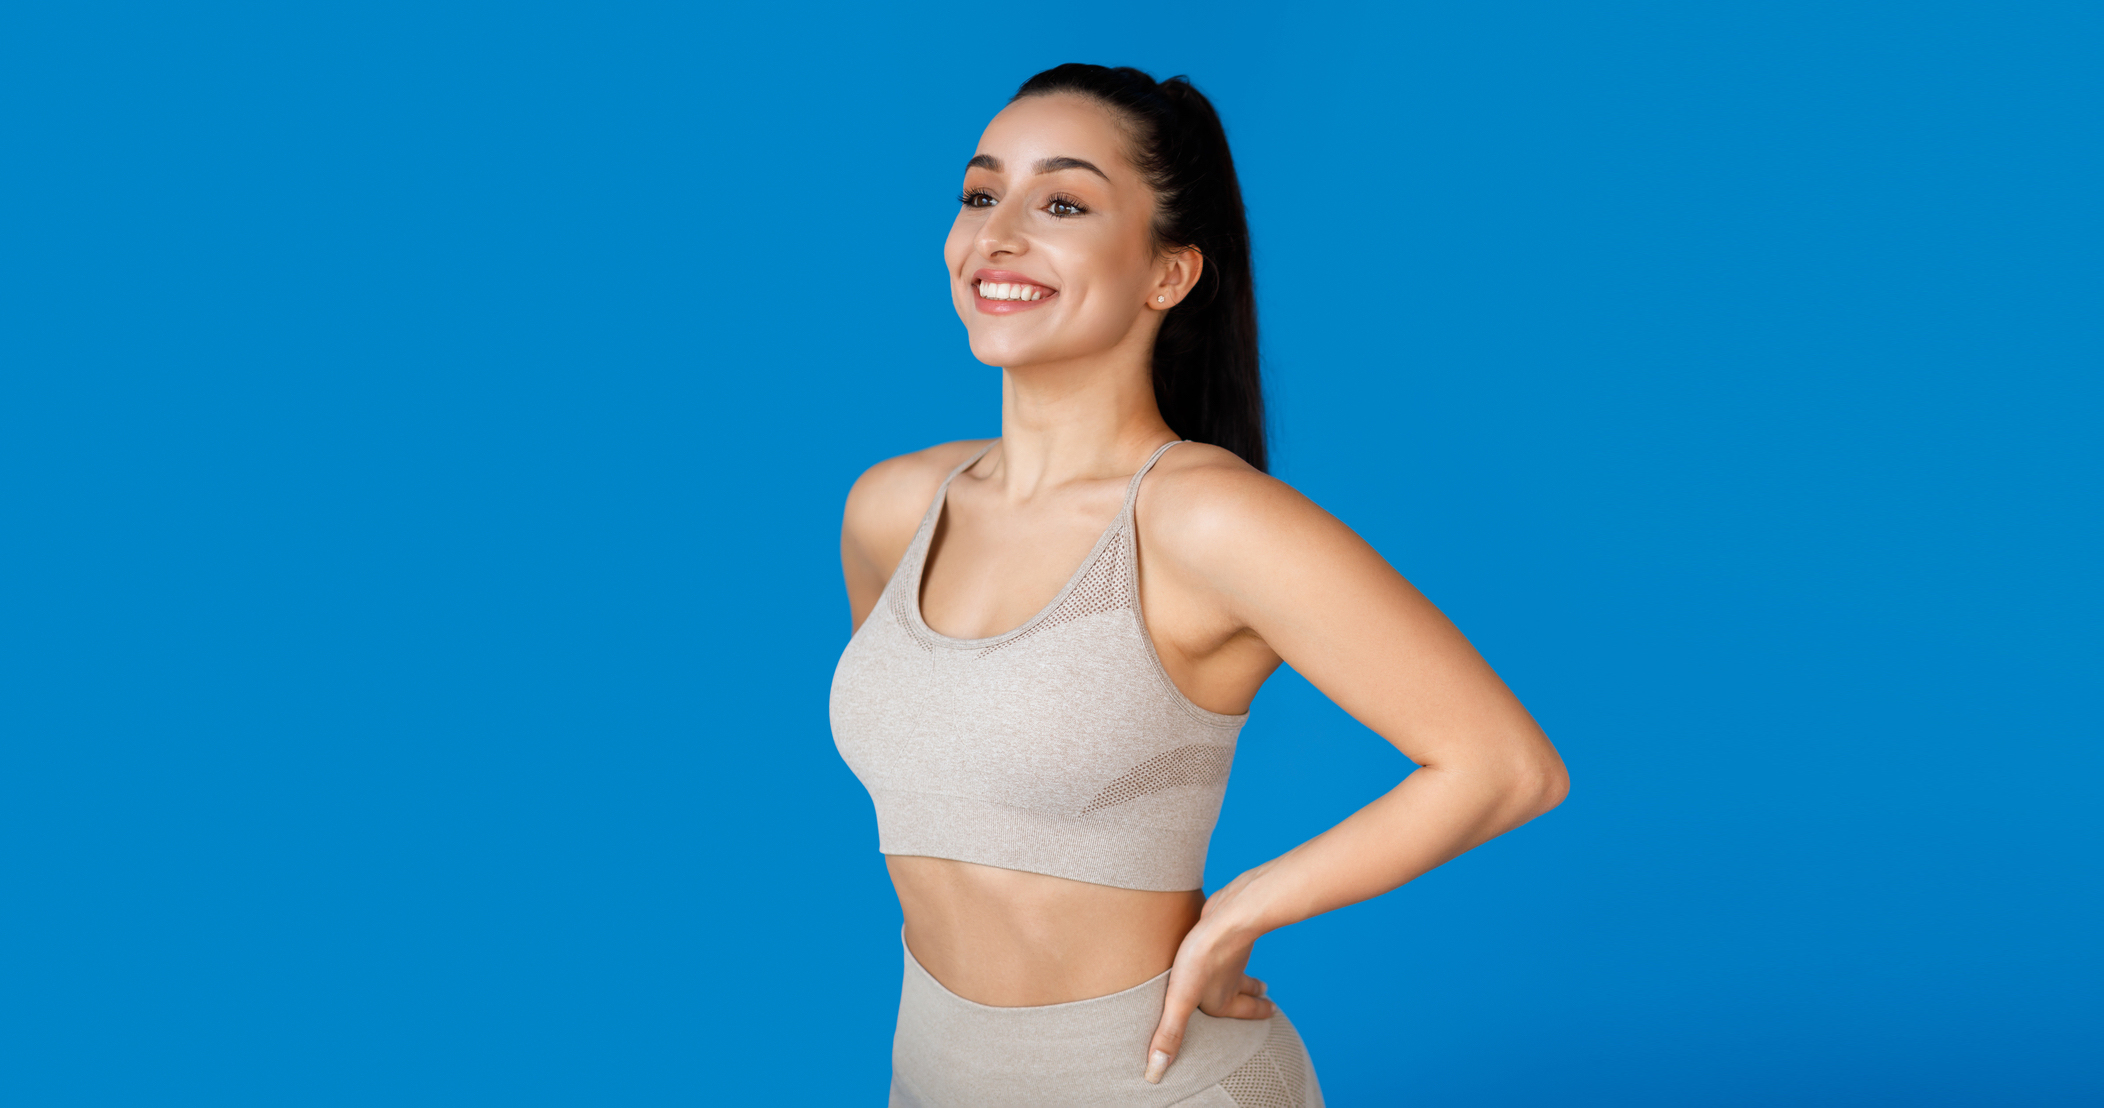 Happy woman with athletic body holding hands on waist